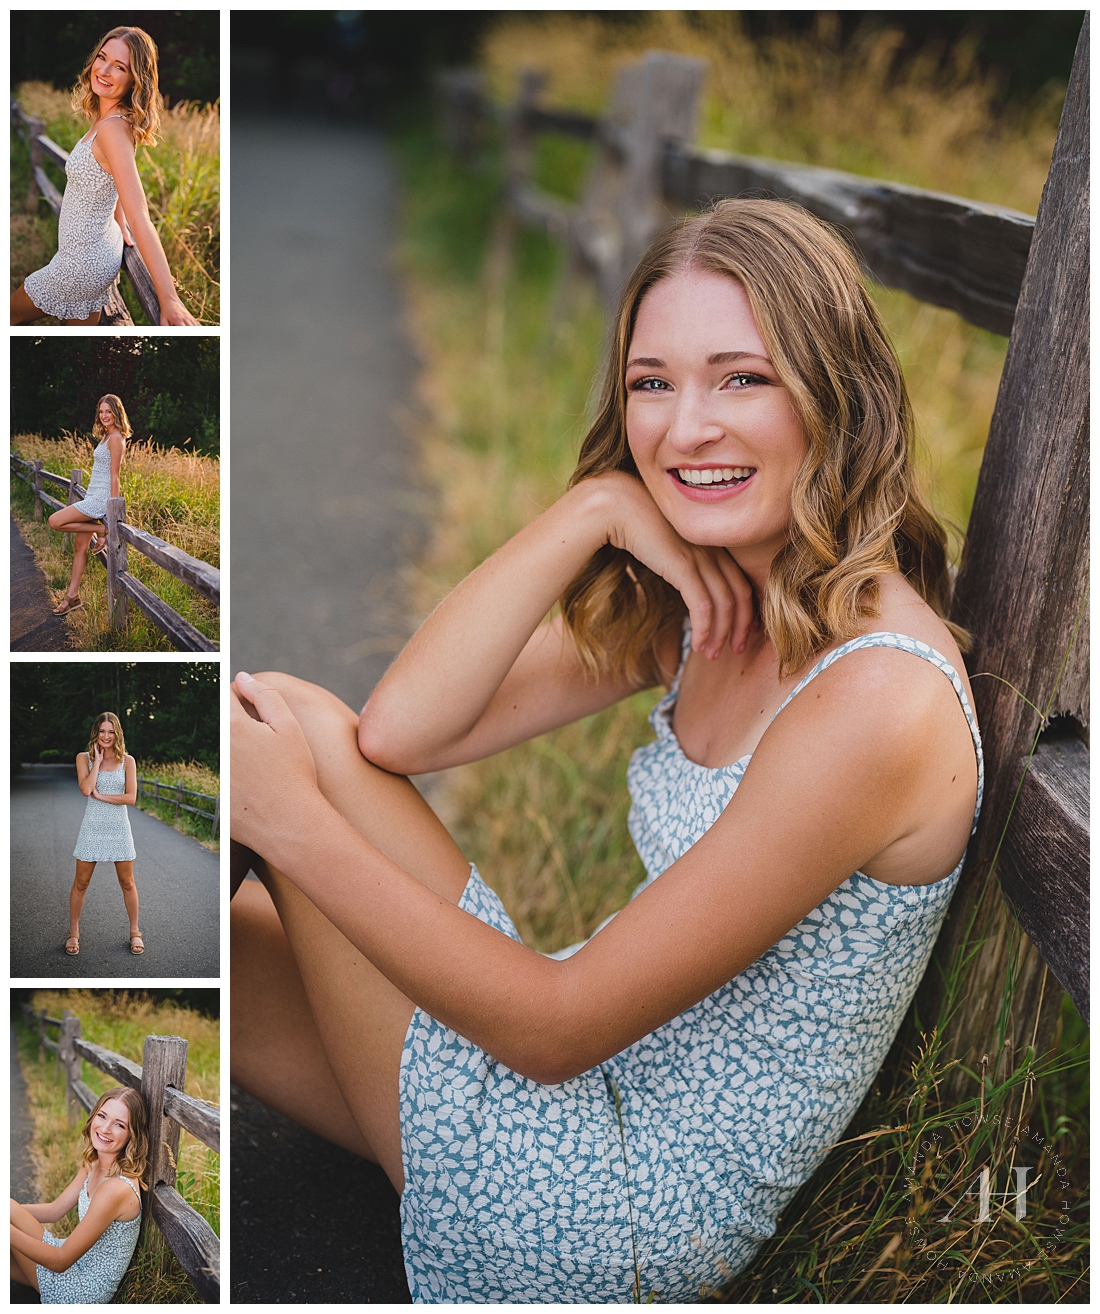 Cute Summer Senior Photos in Tall Yellow Grass | Blue summer dress and Sandals, Posing Ideas for Fun Senior Portraits | Photographed by the Best Tacoma Senior Photographer Amanda Howse Photography